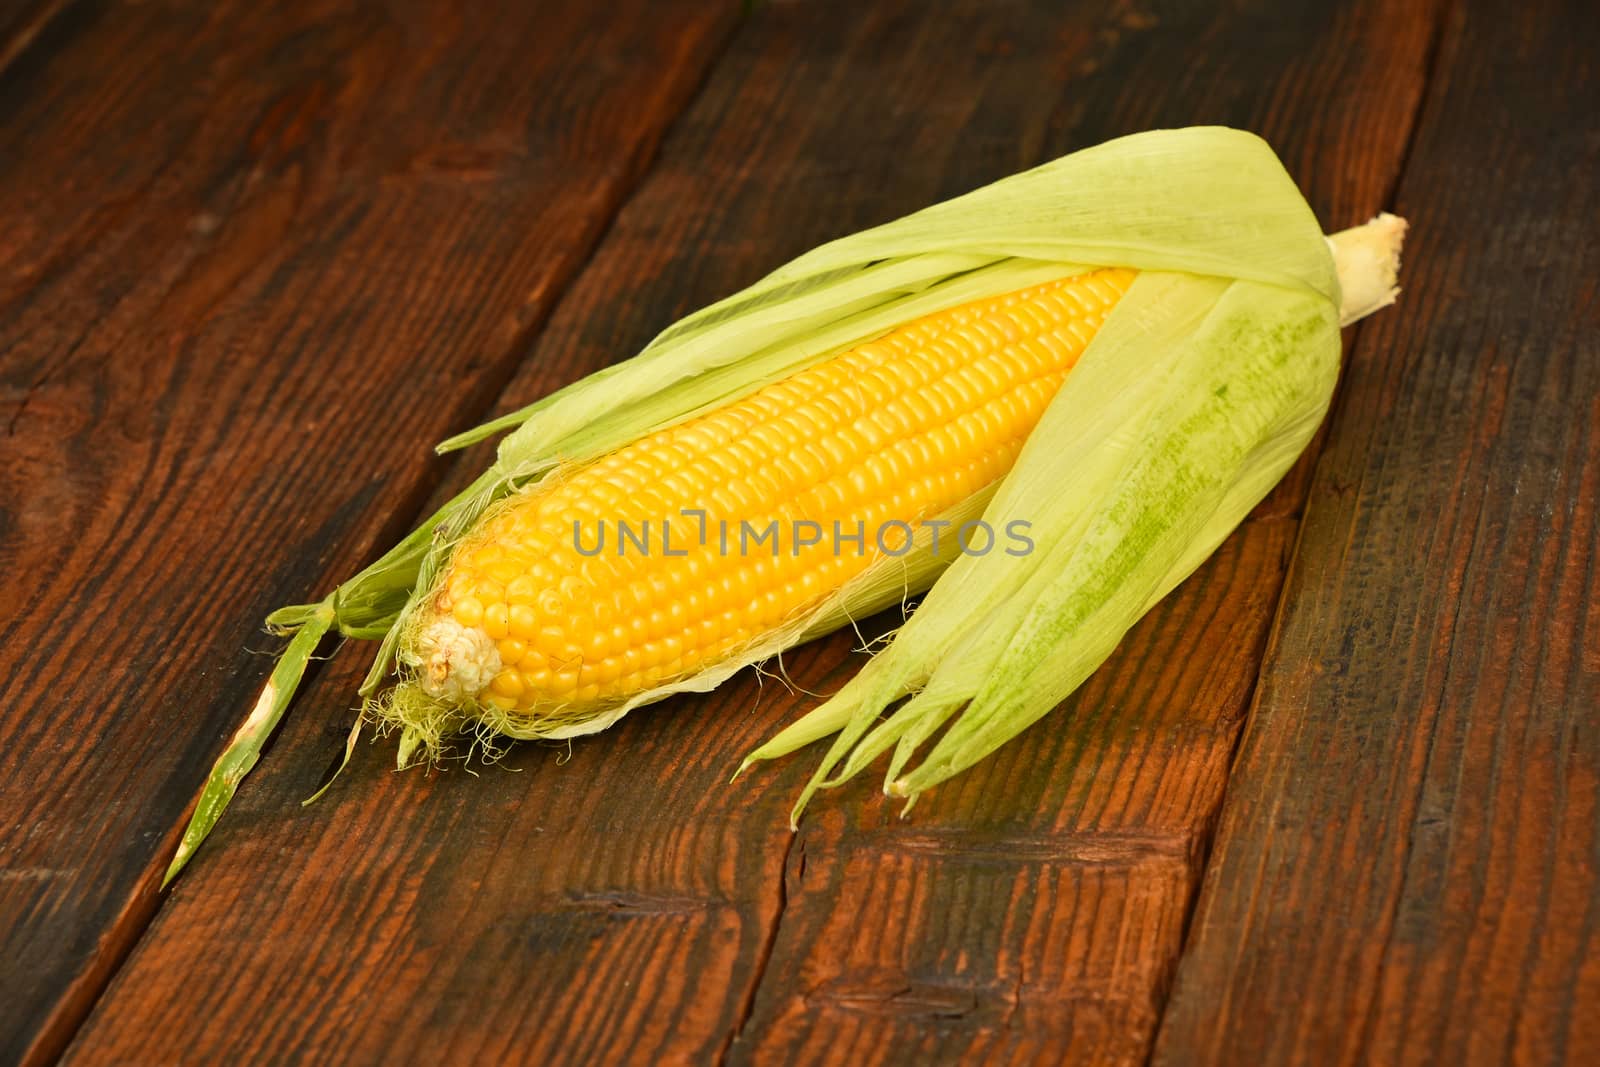 One open fresh yellow corn cob with green husk on dark brown vintage wooden surface